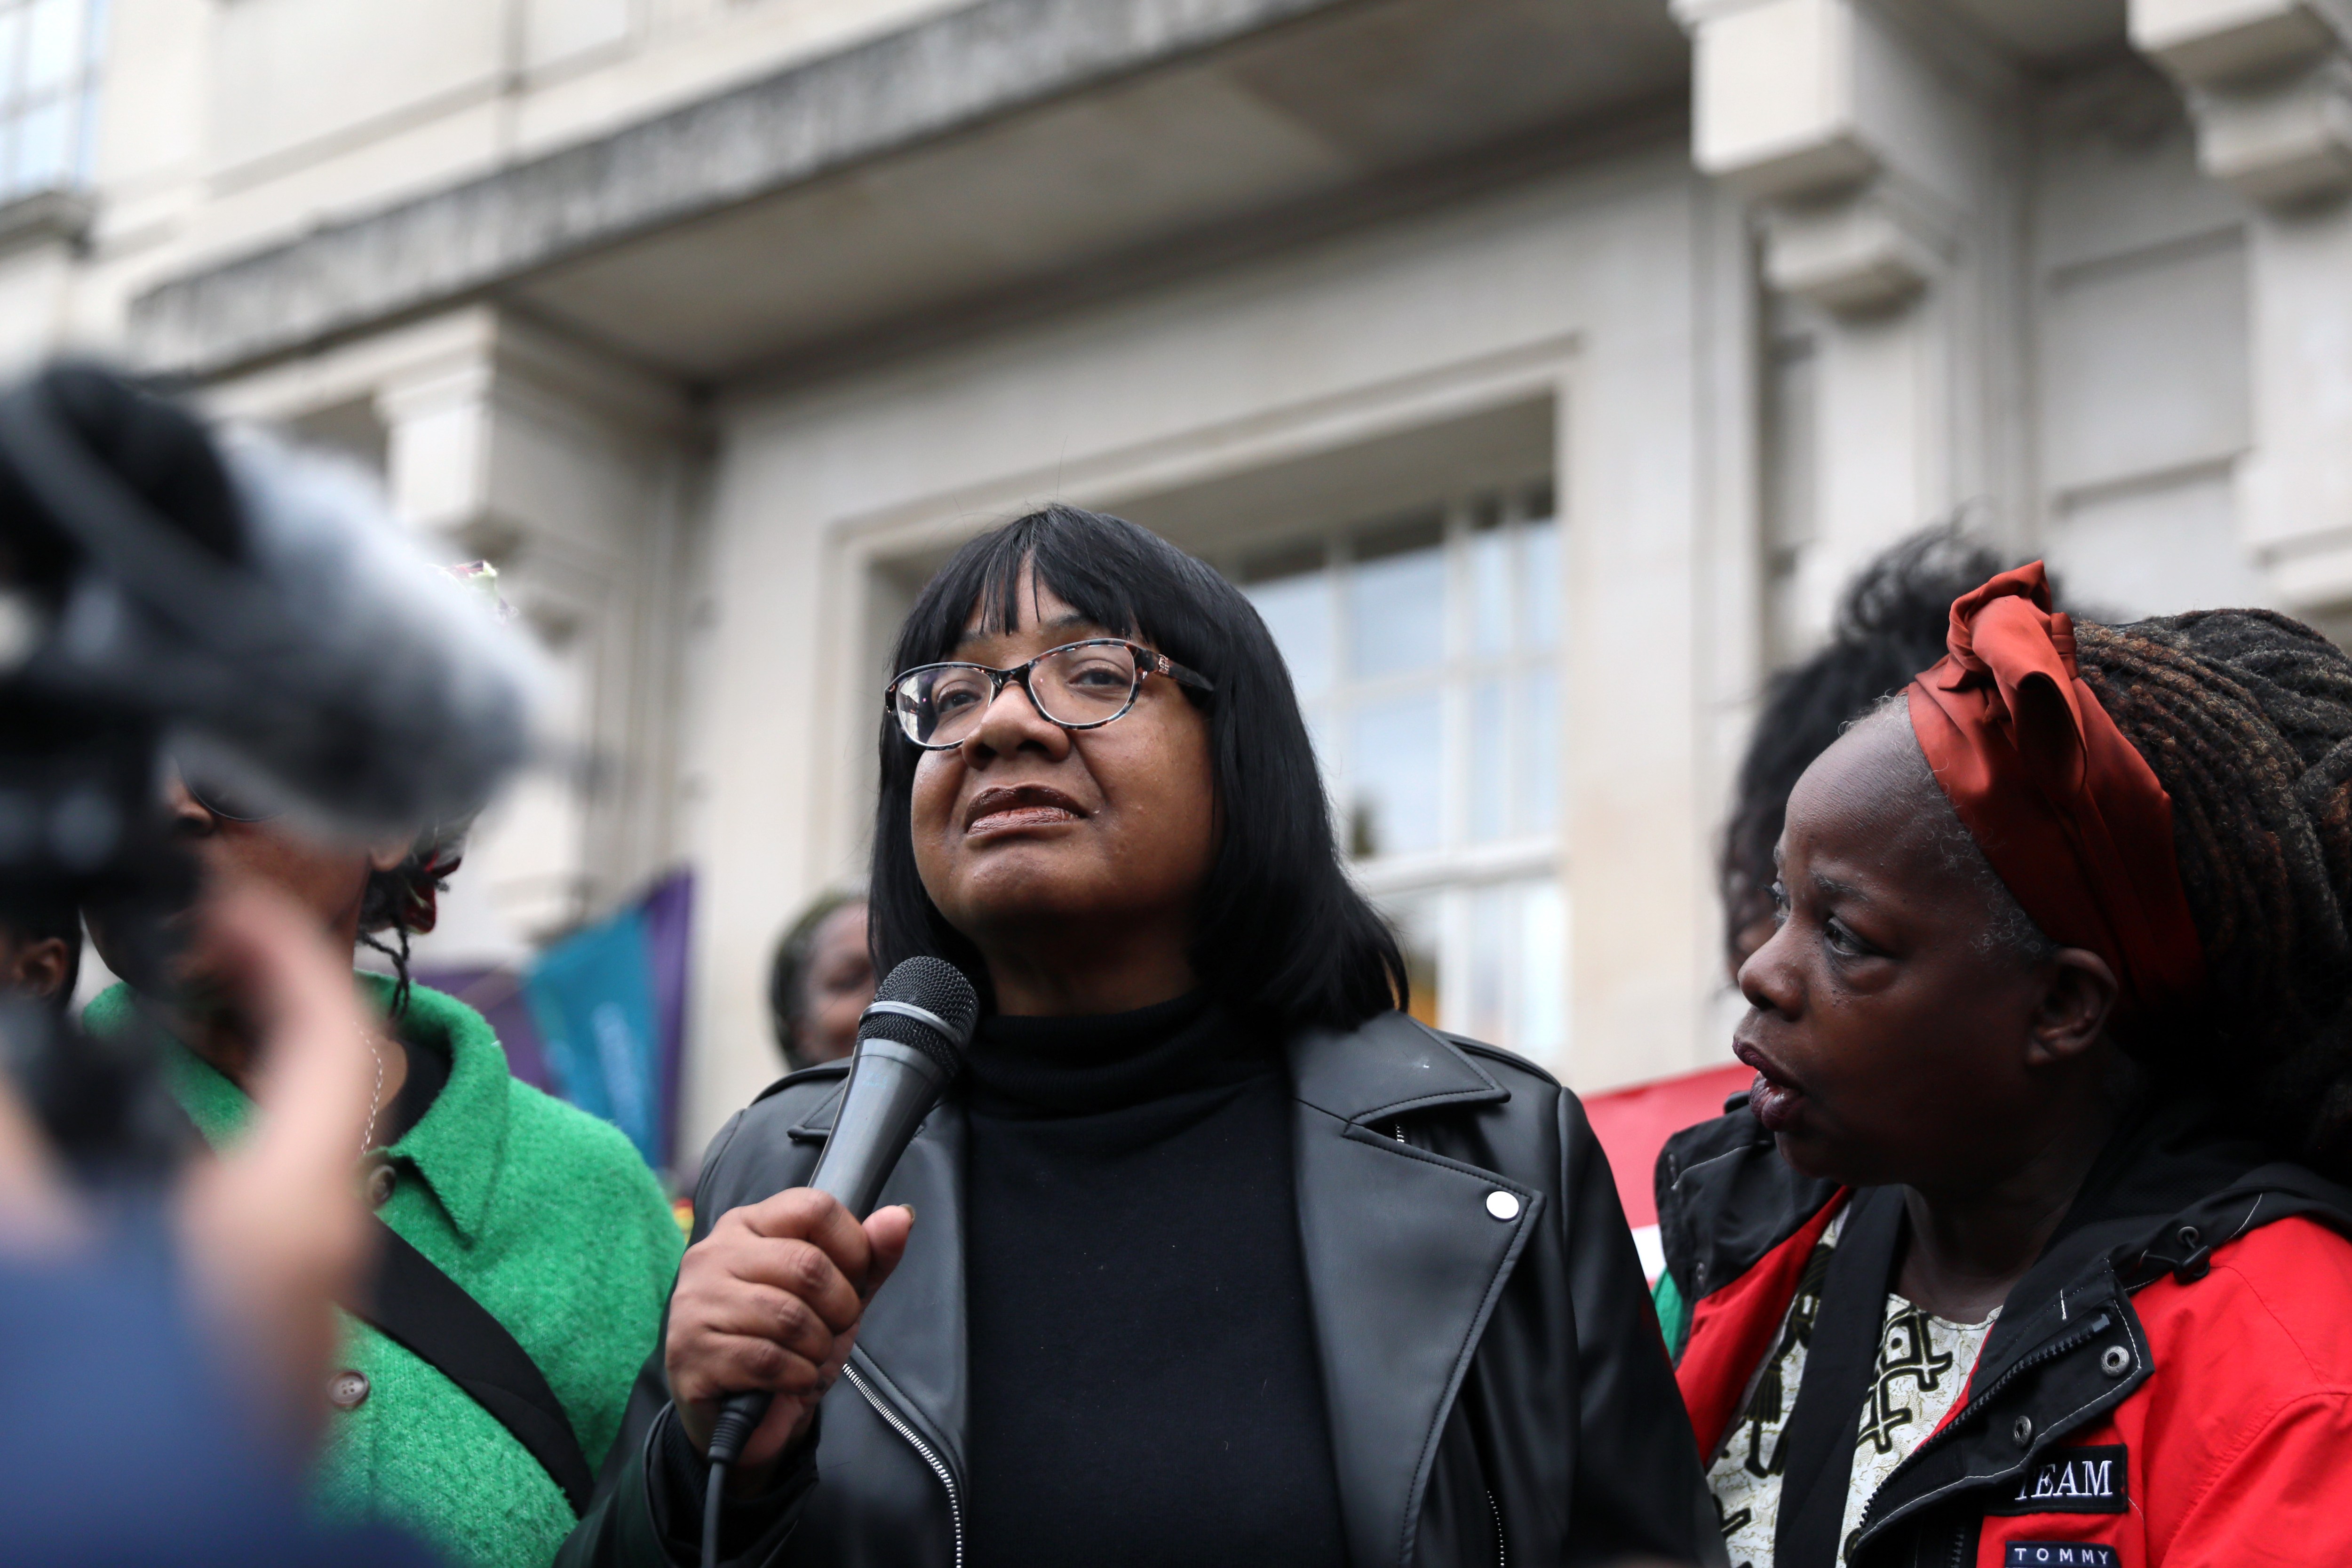 Diane Abbott MP said she had to keep faith with her principles